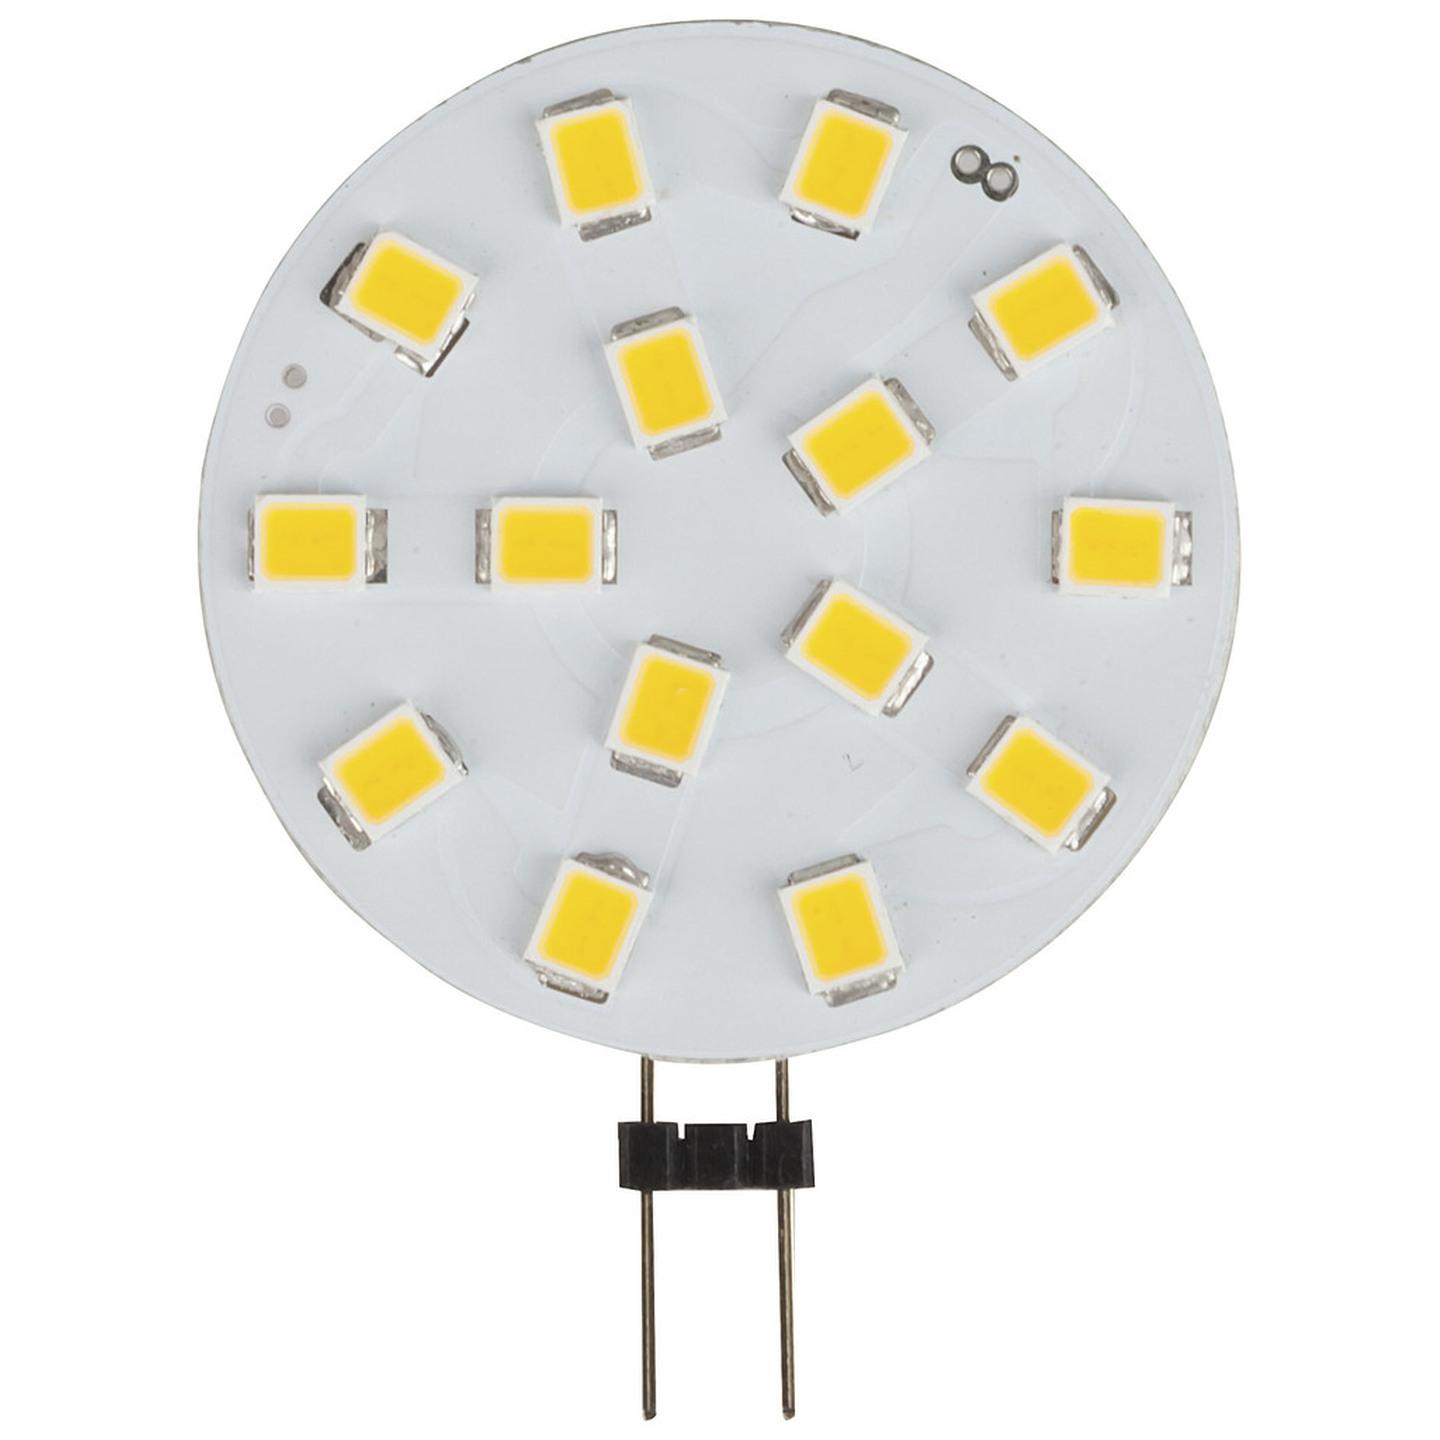 G4 LED Replacement Light 120 12VAC/DC Cool White